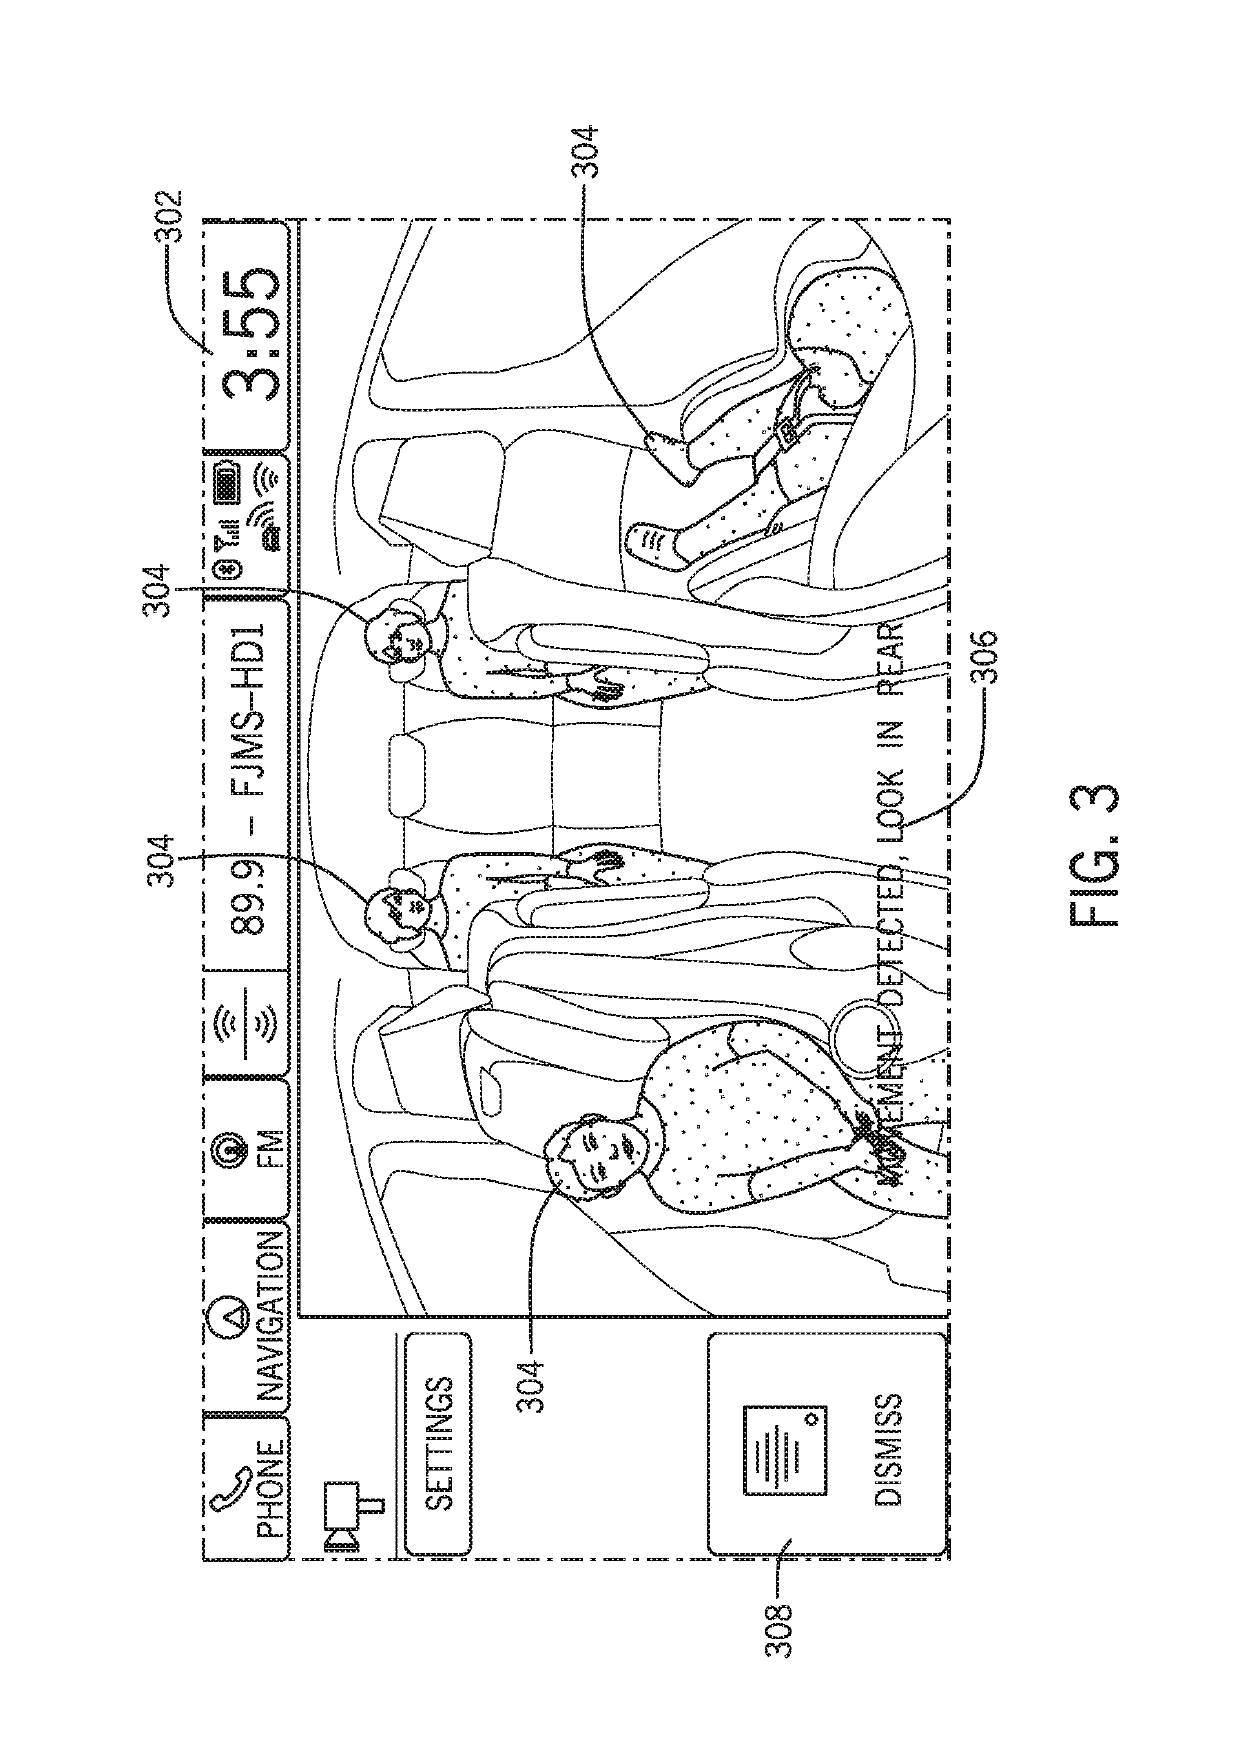 System and method for providing rear seat monitoring within a vehicle